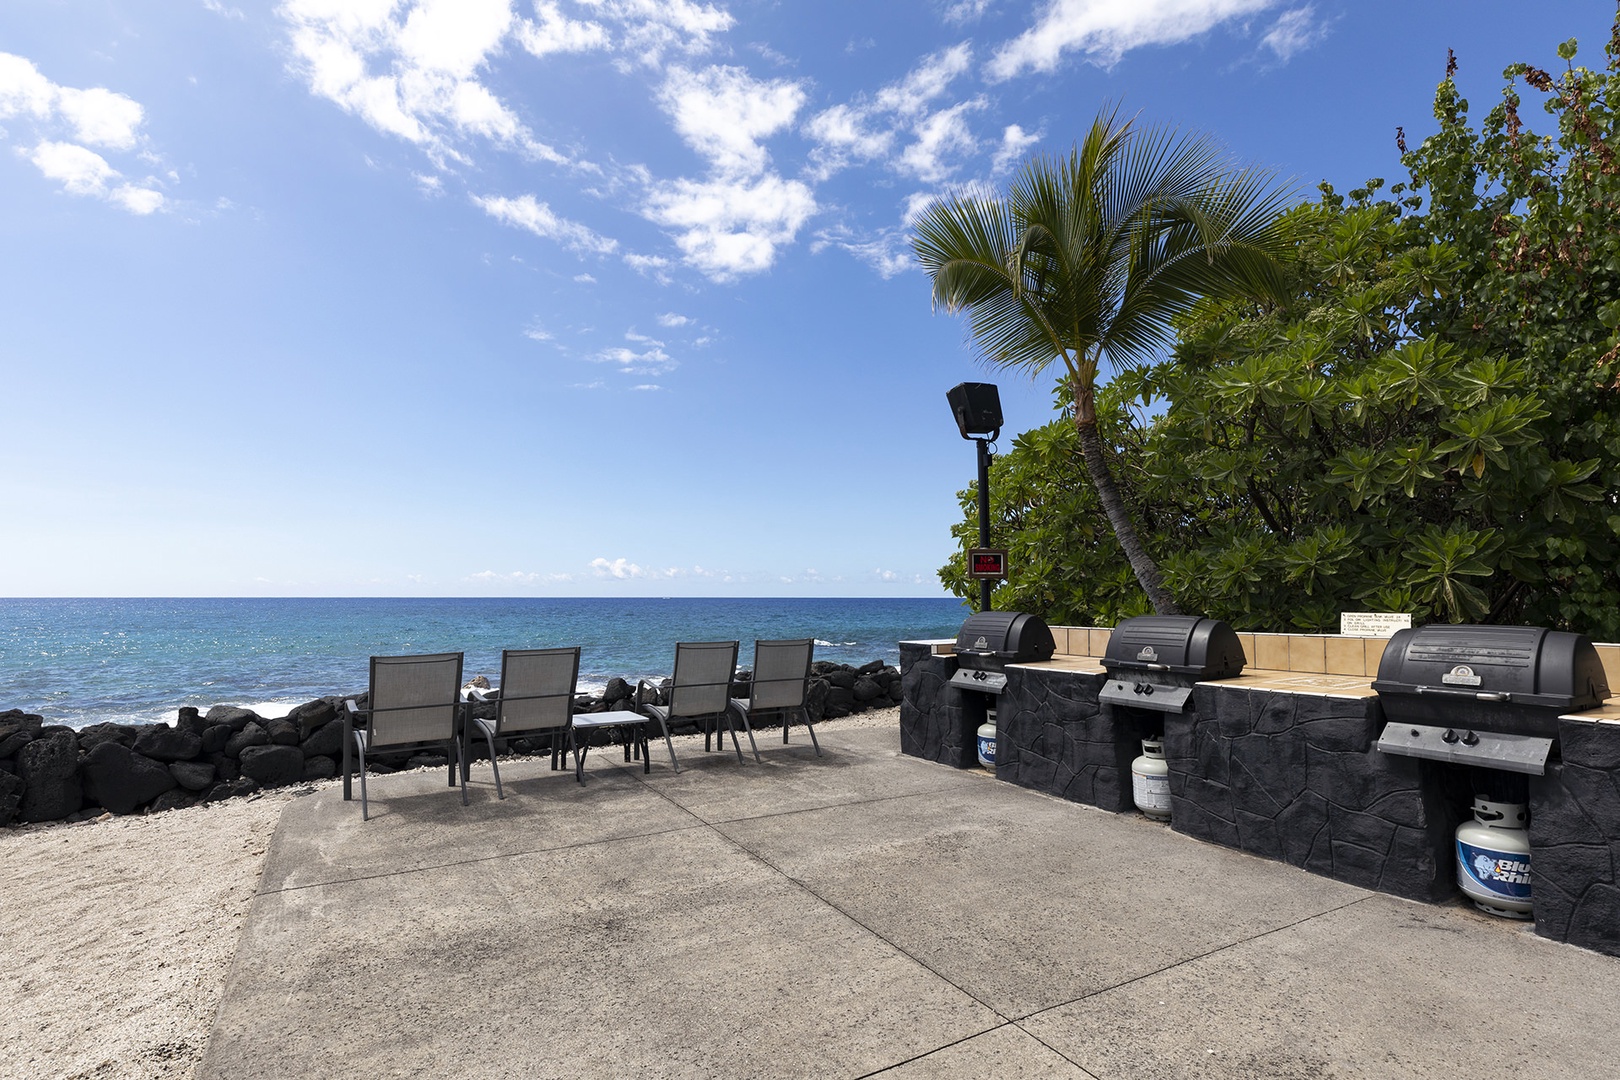 Oceanfront picnic area with lounge seating